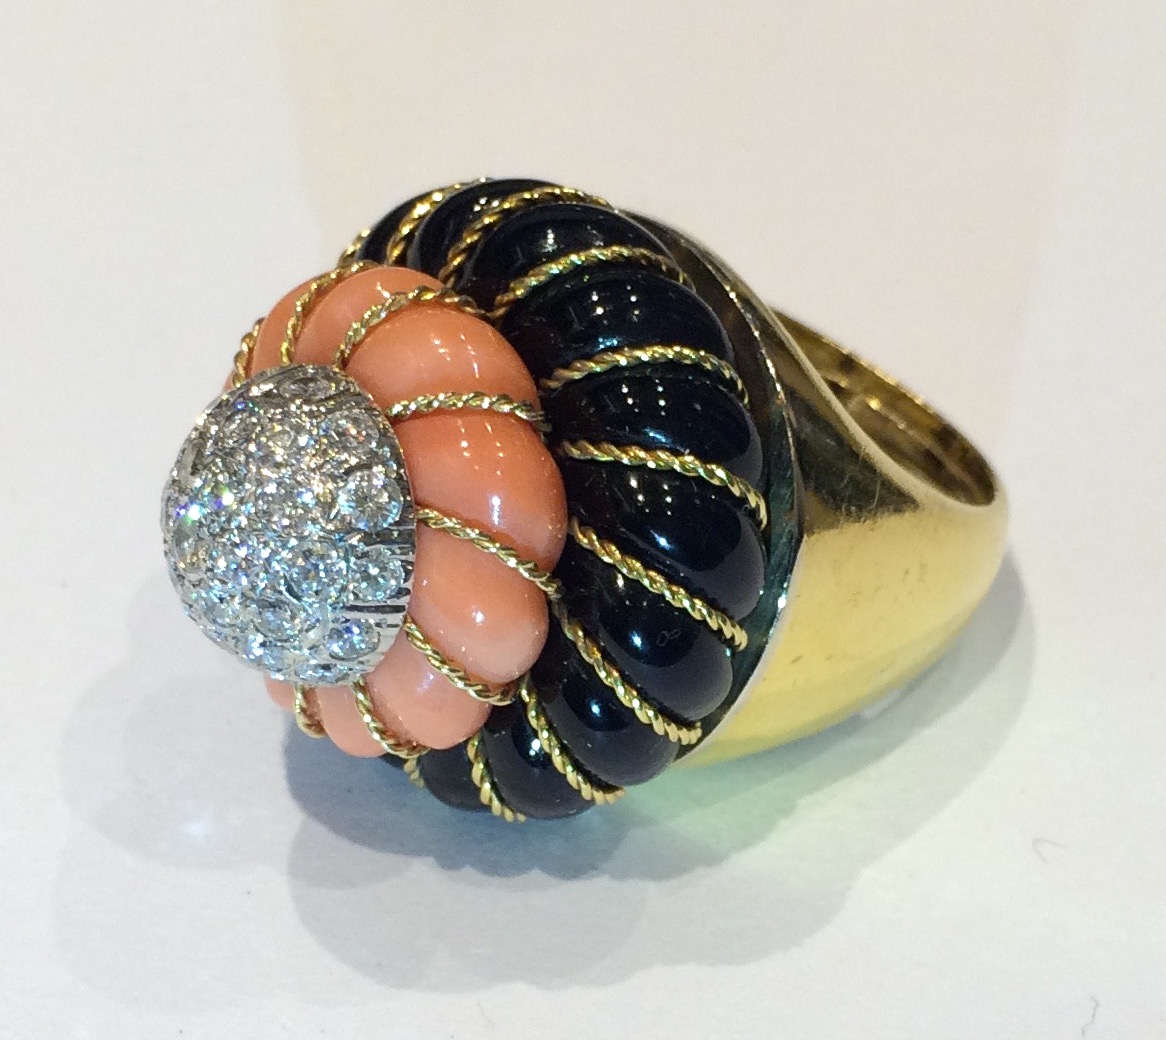 Italian “Cake” ring with coral, onyx and diamonds in an 18K gold mount, marked, c. 1950’s